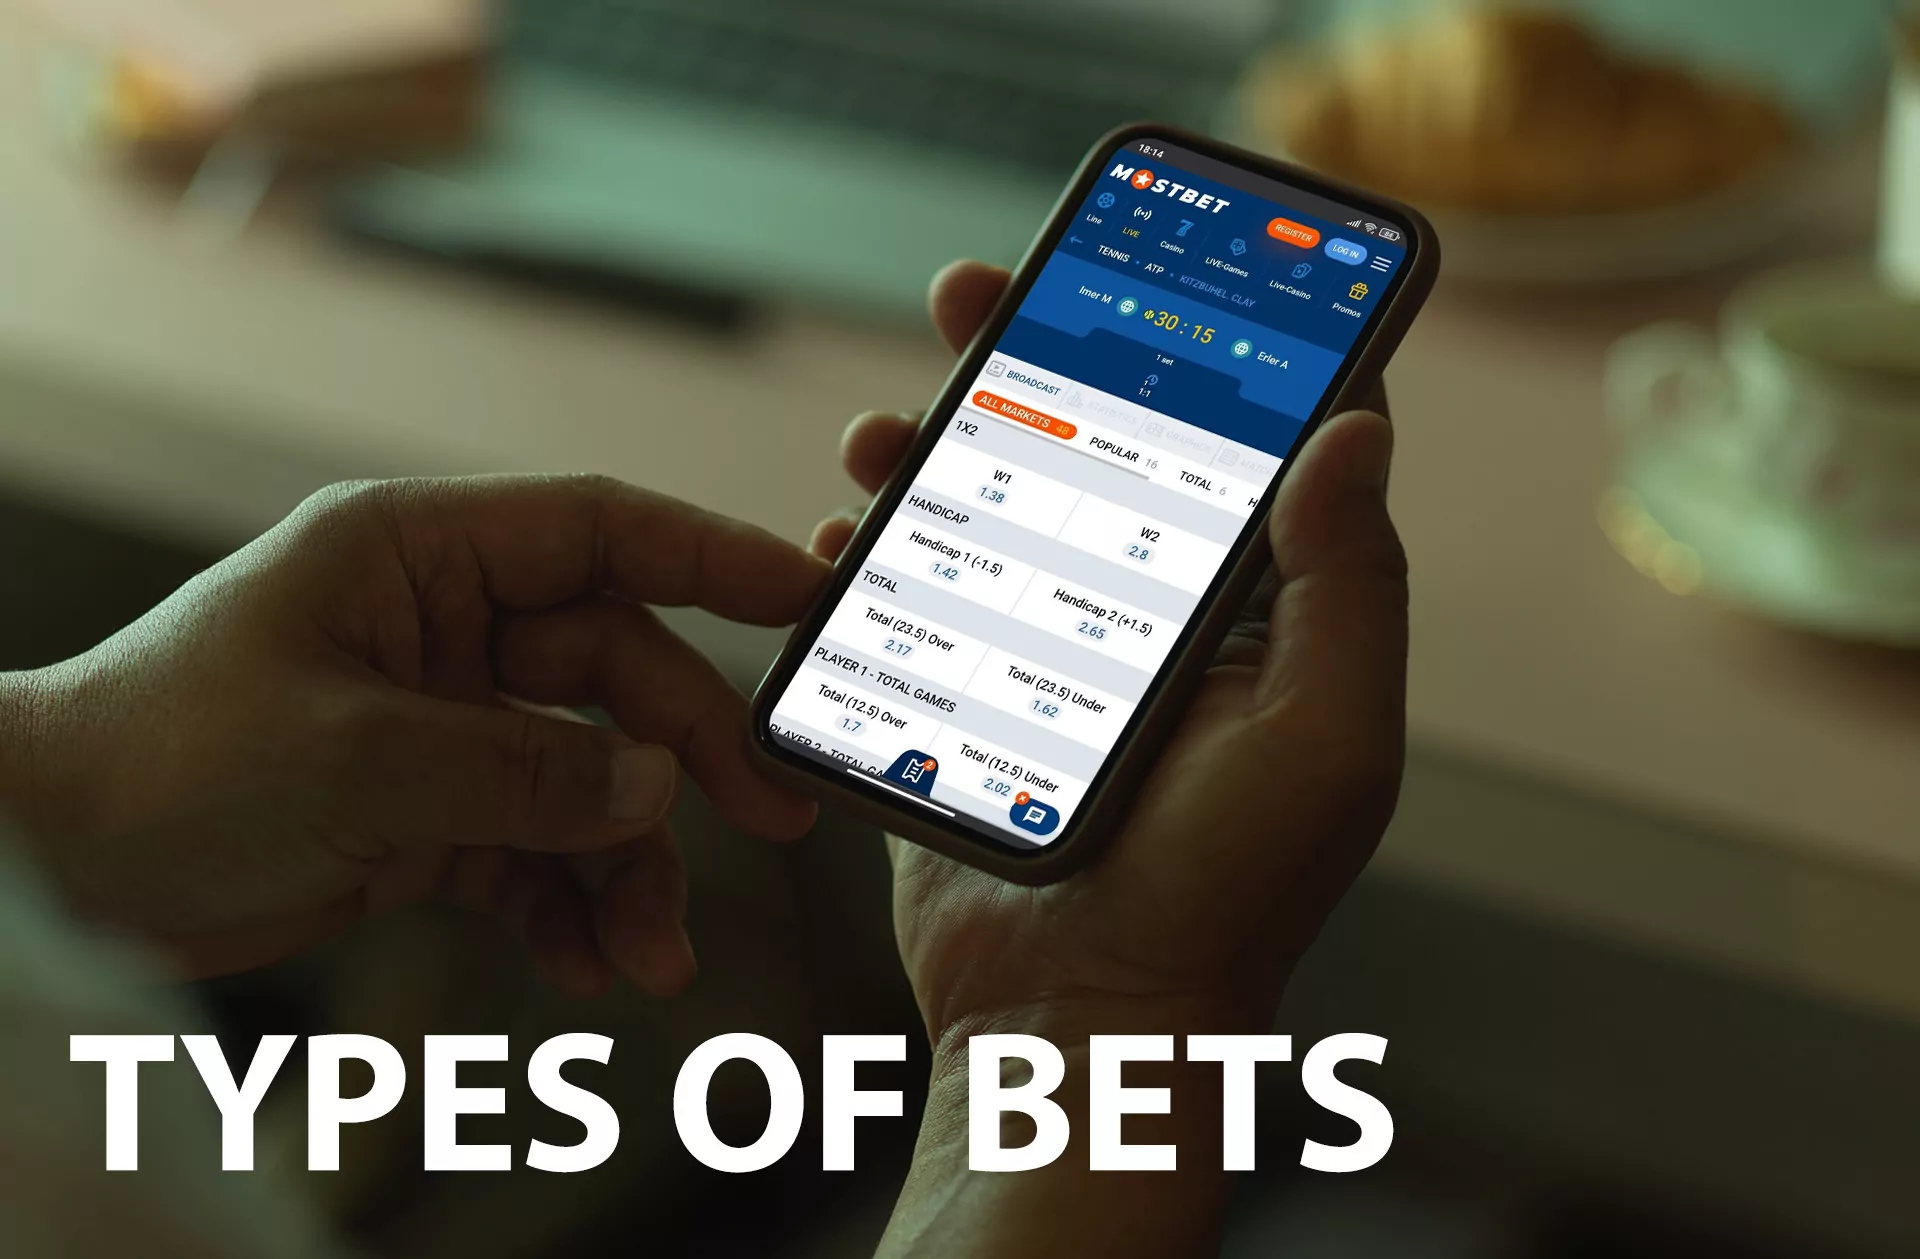 You can place whichever bet you want via the Mostbet mobile app.